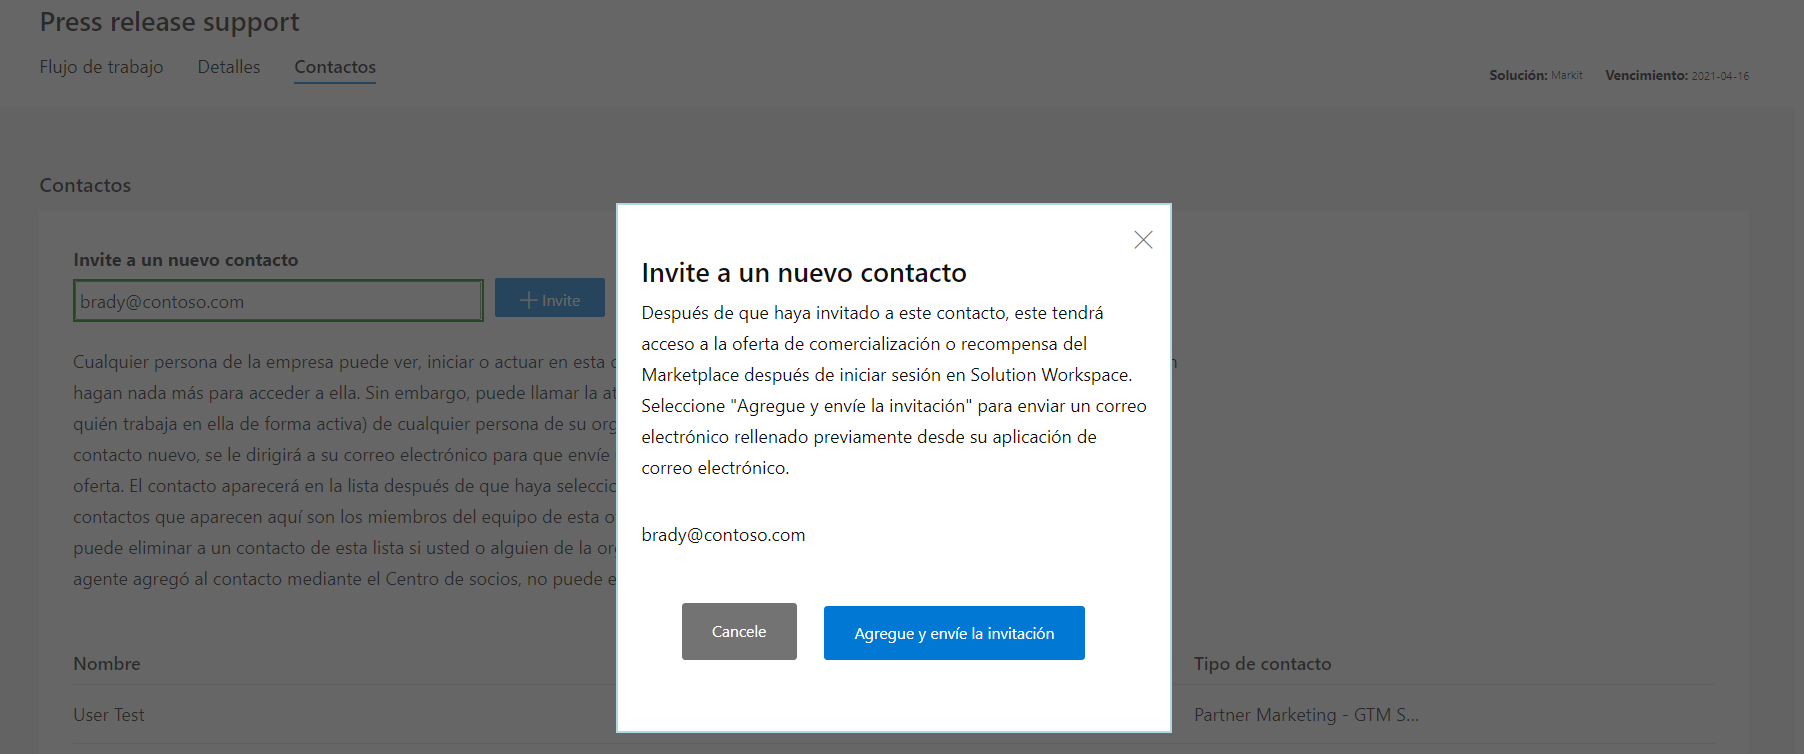 Image of invite new contact